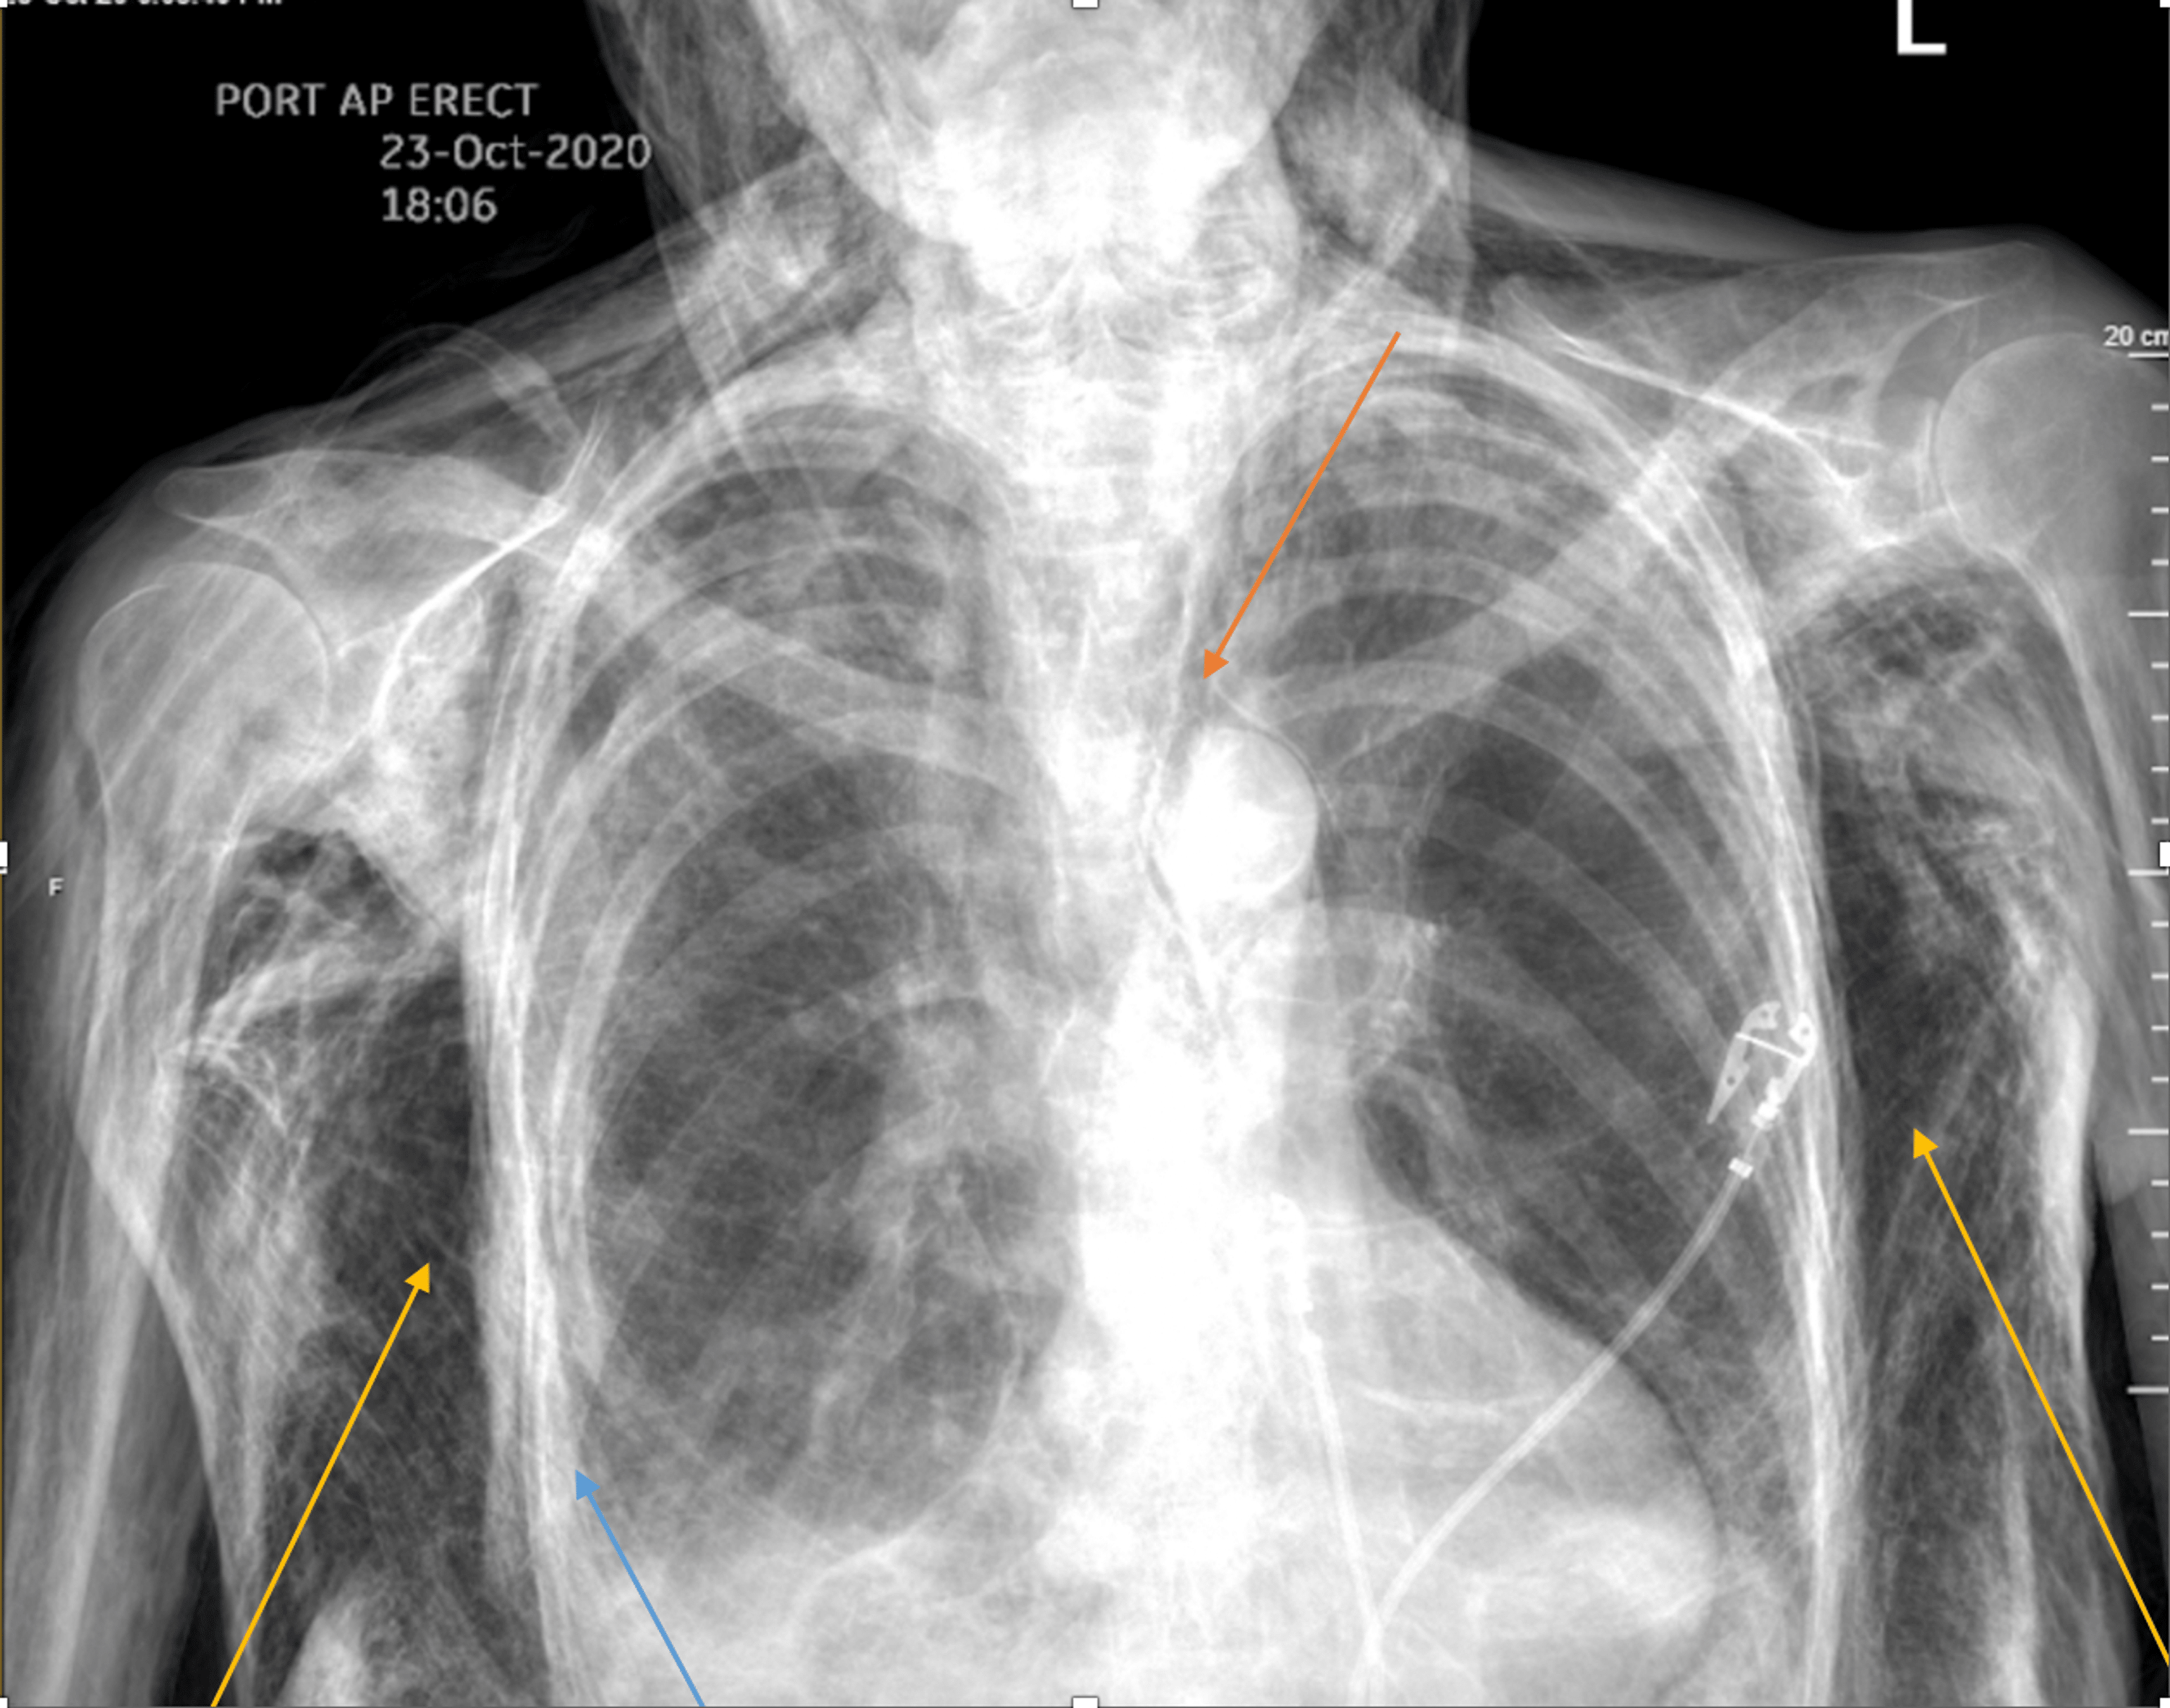 The Chest X Ray Demonstrates Extensive Subcutaneous Emphysema And My